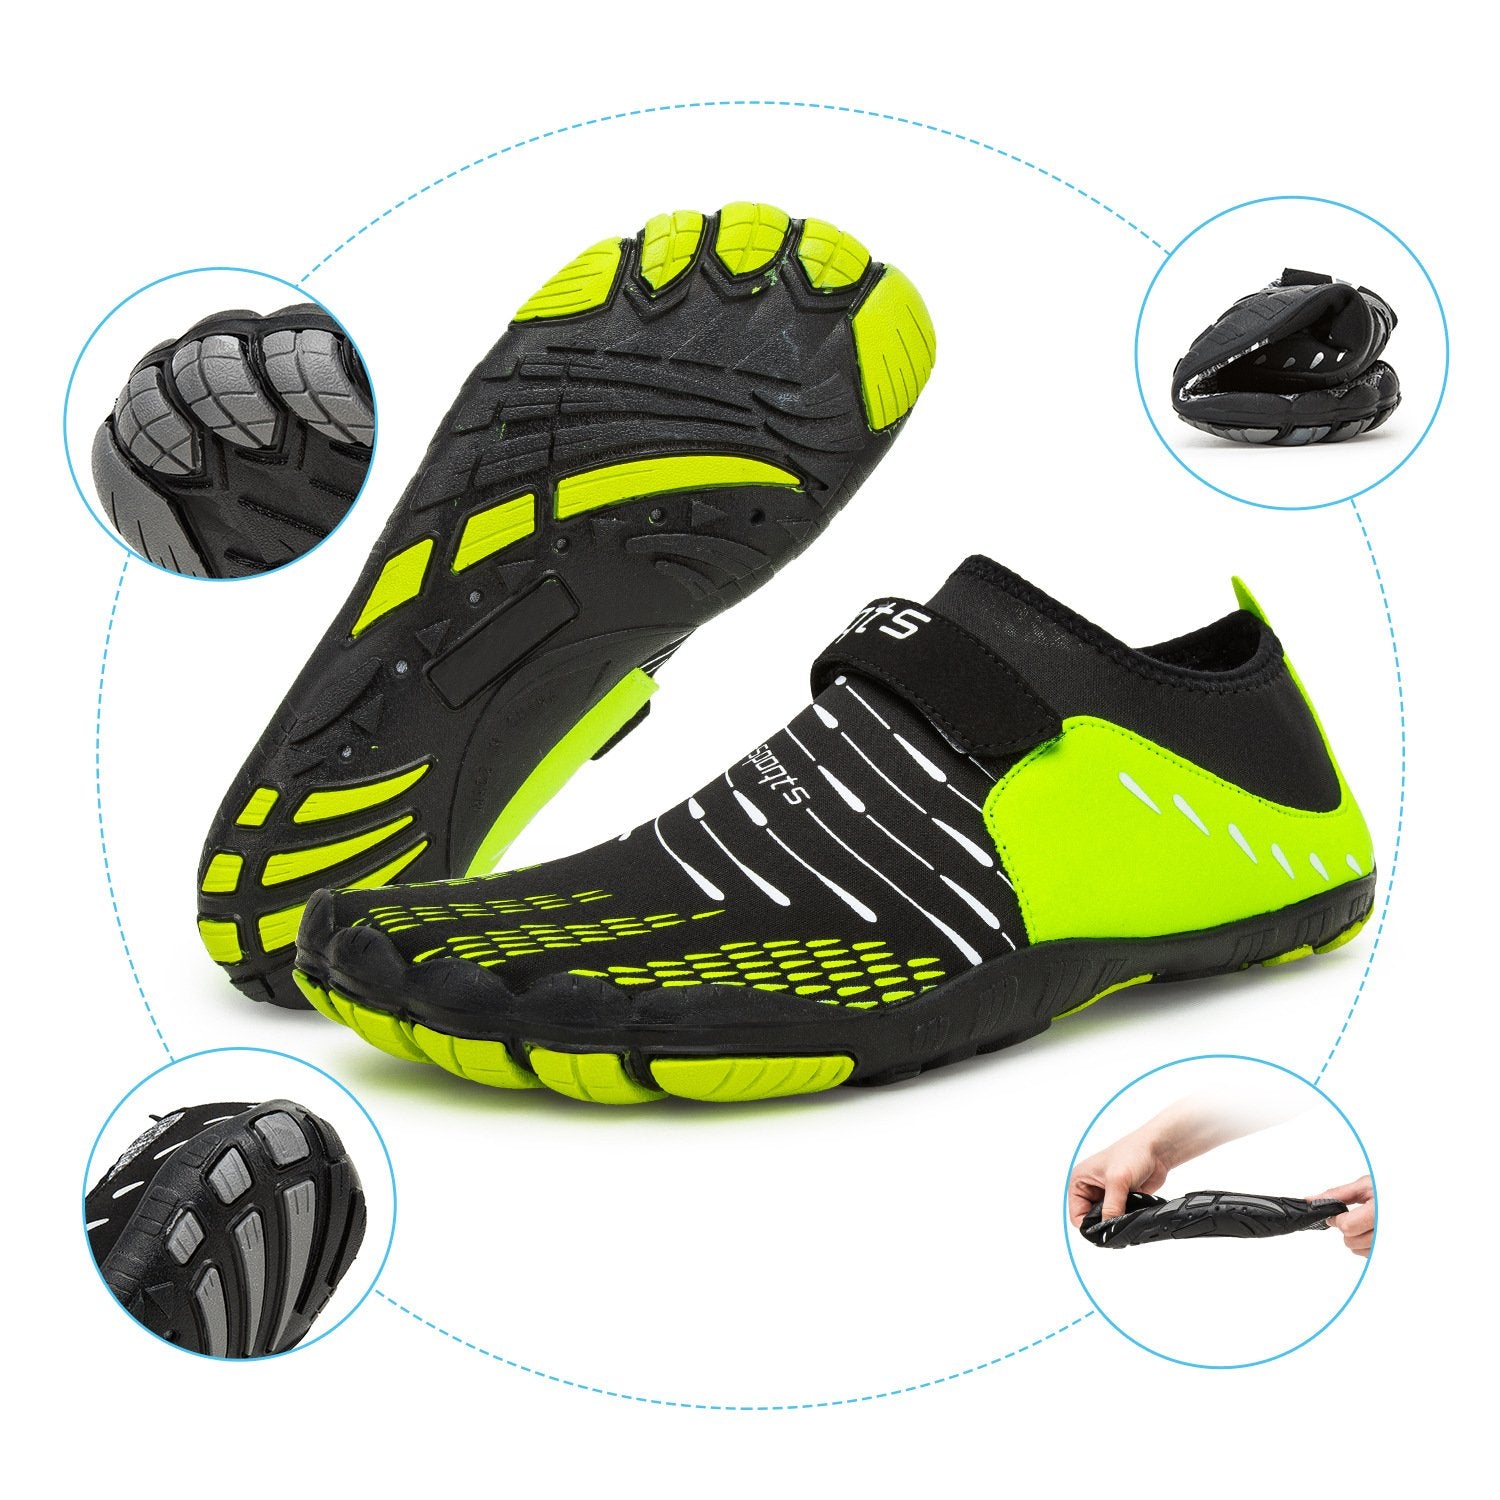 Man's climbing shoes five-finger shoes breathable water shoes beach shoes wading shoes